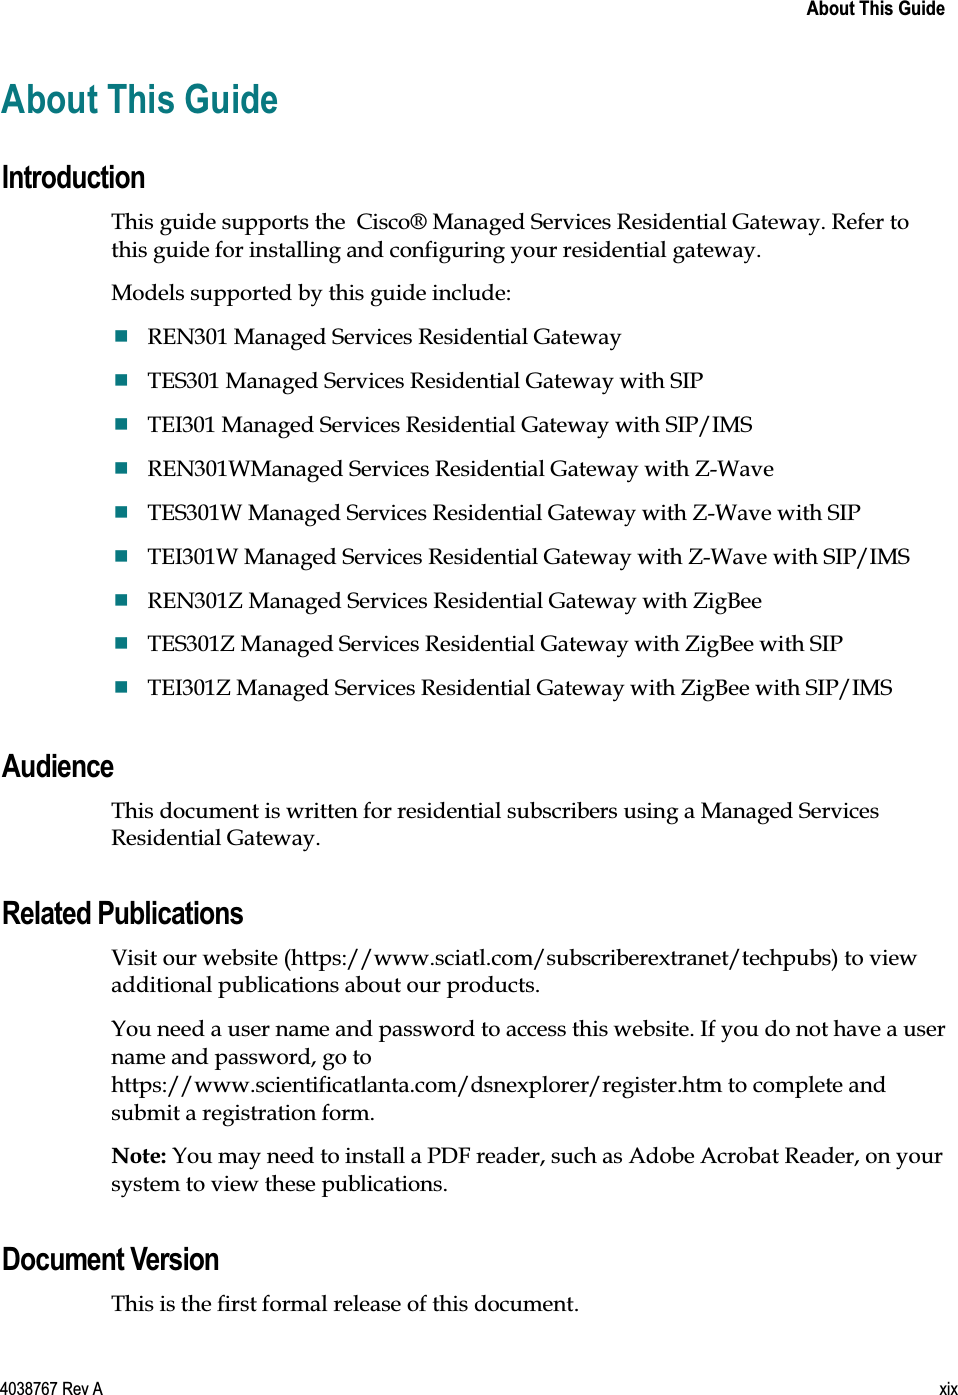    About This Guide  4038767 Rev A  xix  About This Guide Introduction This guide supports the  Cisco® Managed Services Residential Gateway. Refer to this guide for installing and configuring your residential gateway. Models supported by this guide include:  REN301 Managed Services Residential Gateway  TES301 Managed Services Residential Gateway with SIP  TEI301 Managed Services Residential Gateway with SIP/IMS   REN301WManaged Services Residential Gateway with Z-Wave  TES301W Managed Services Residential Gateway with Z-Wave with SIP  TEI301W Managed Services Residential Gateway with Z-Wave with SIP/IMS   REN301Z Managed Services Residential Gateway with ZigBee  TES301Z Managed Services Residential Gateway with ZigBee with SIP  TEI301Z Managed Services Residential Gateway with ZigBee with SIP/IMS     Audience This document is written for residential subscribers using a Managed Services Residential Gateway.  Related Publications Visit our website (https://www.sciatl.com/subscriberextranet/techpubs) to view additional publications about our products. You need a user name and password to access this website. If you do not have a user name and password, go to https://www.scientificatlanta.com/dsnexplorer/register.htm to complete and submit a registration form. Note: You may need to install a PDF reader, such as Adobe Acrobat Reader, on your system to view these publications.  Document Version This is the first formal release of this document.  